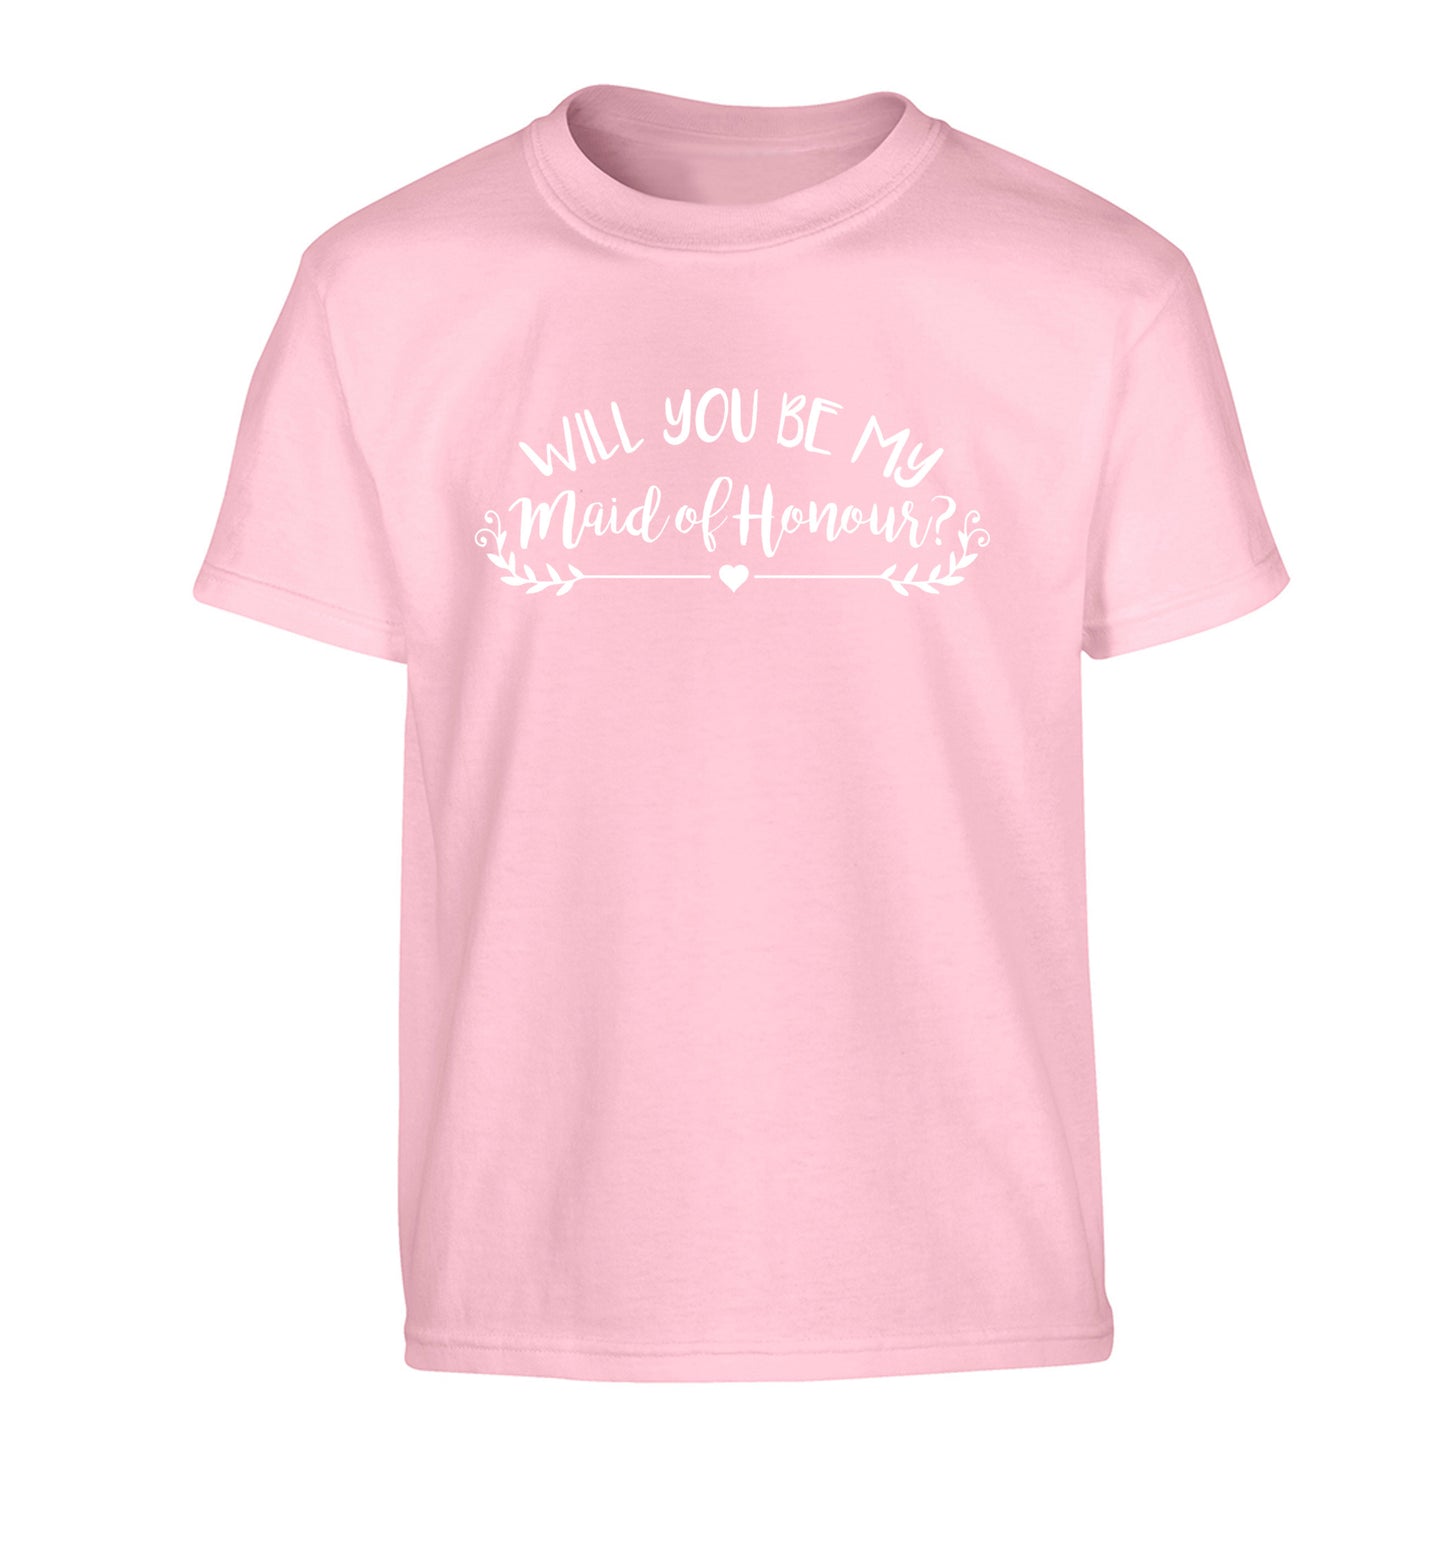 Will you be my maid of honour? Children's light pink Tshirt 12-14 Years